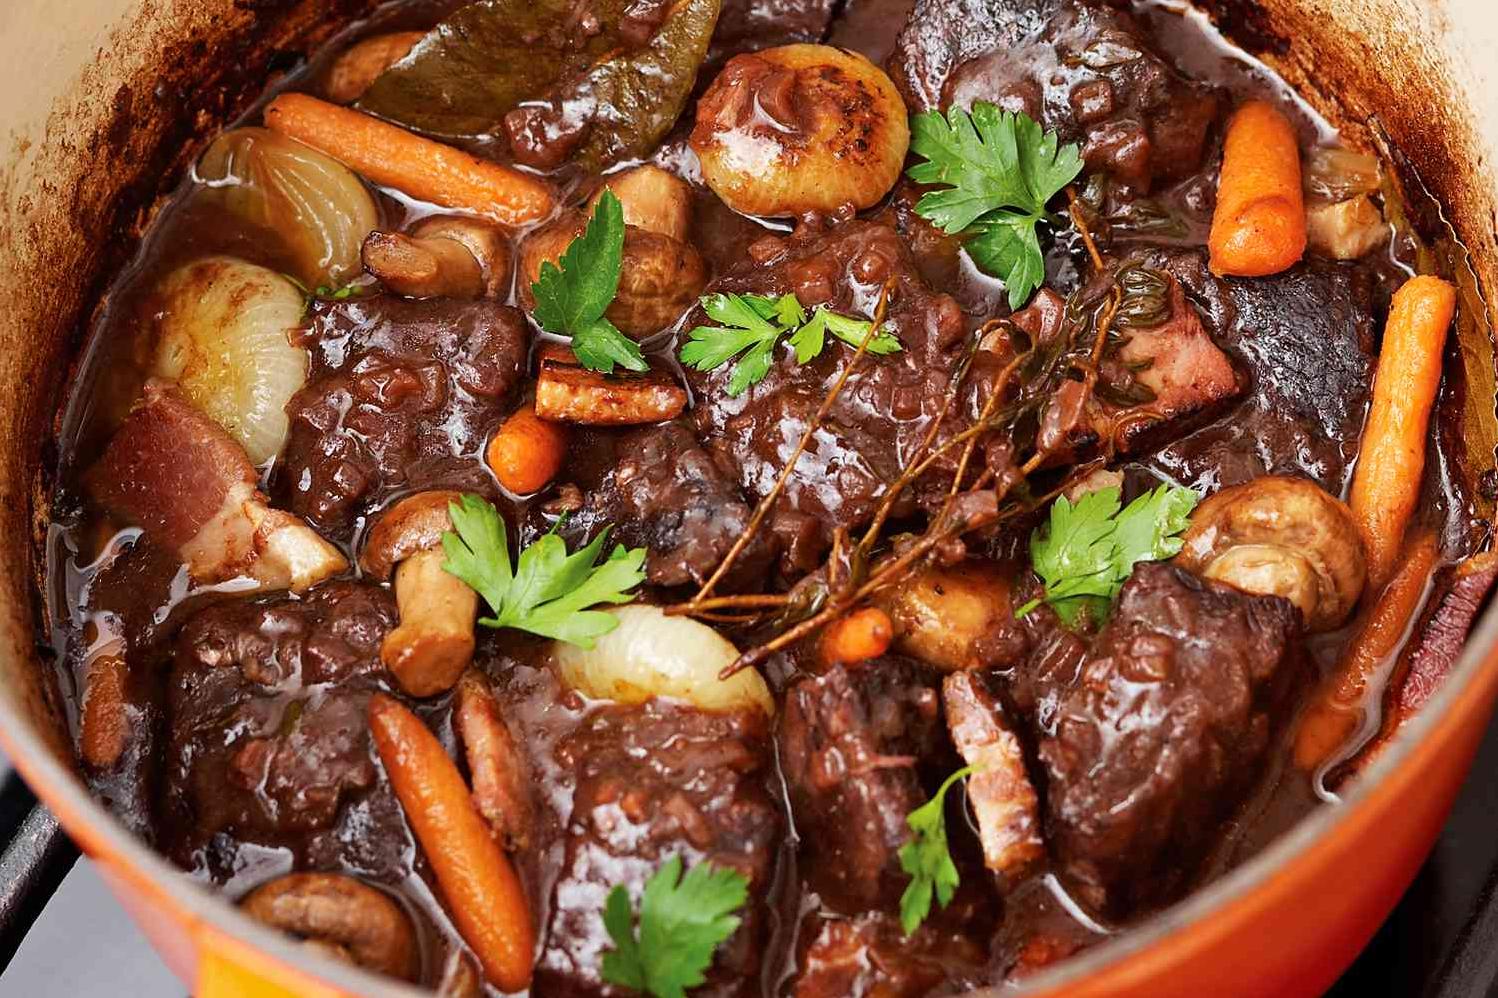  Slow-cooked beef, earthy vegetables, and red wine mingle together in every scrumptious spoonful.